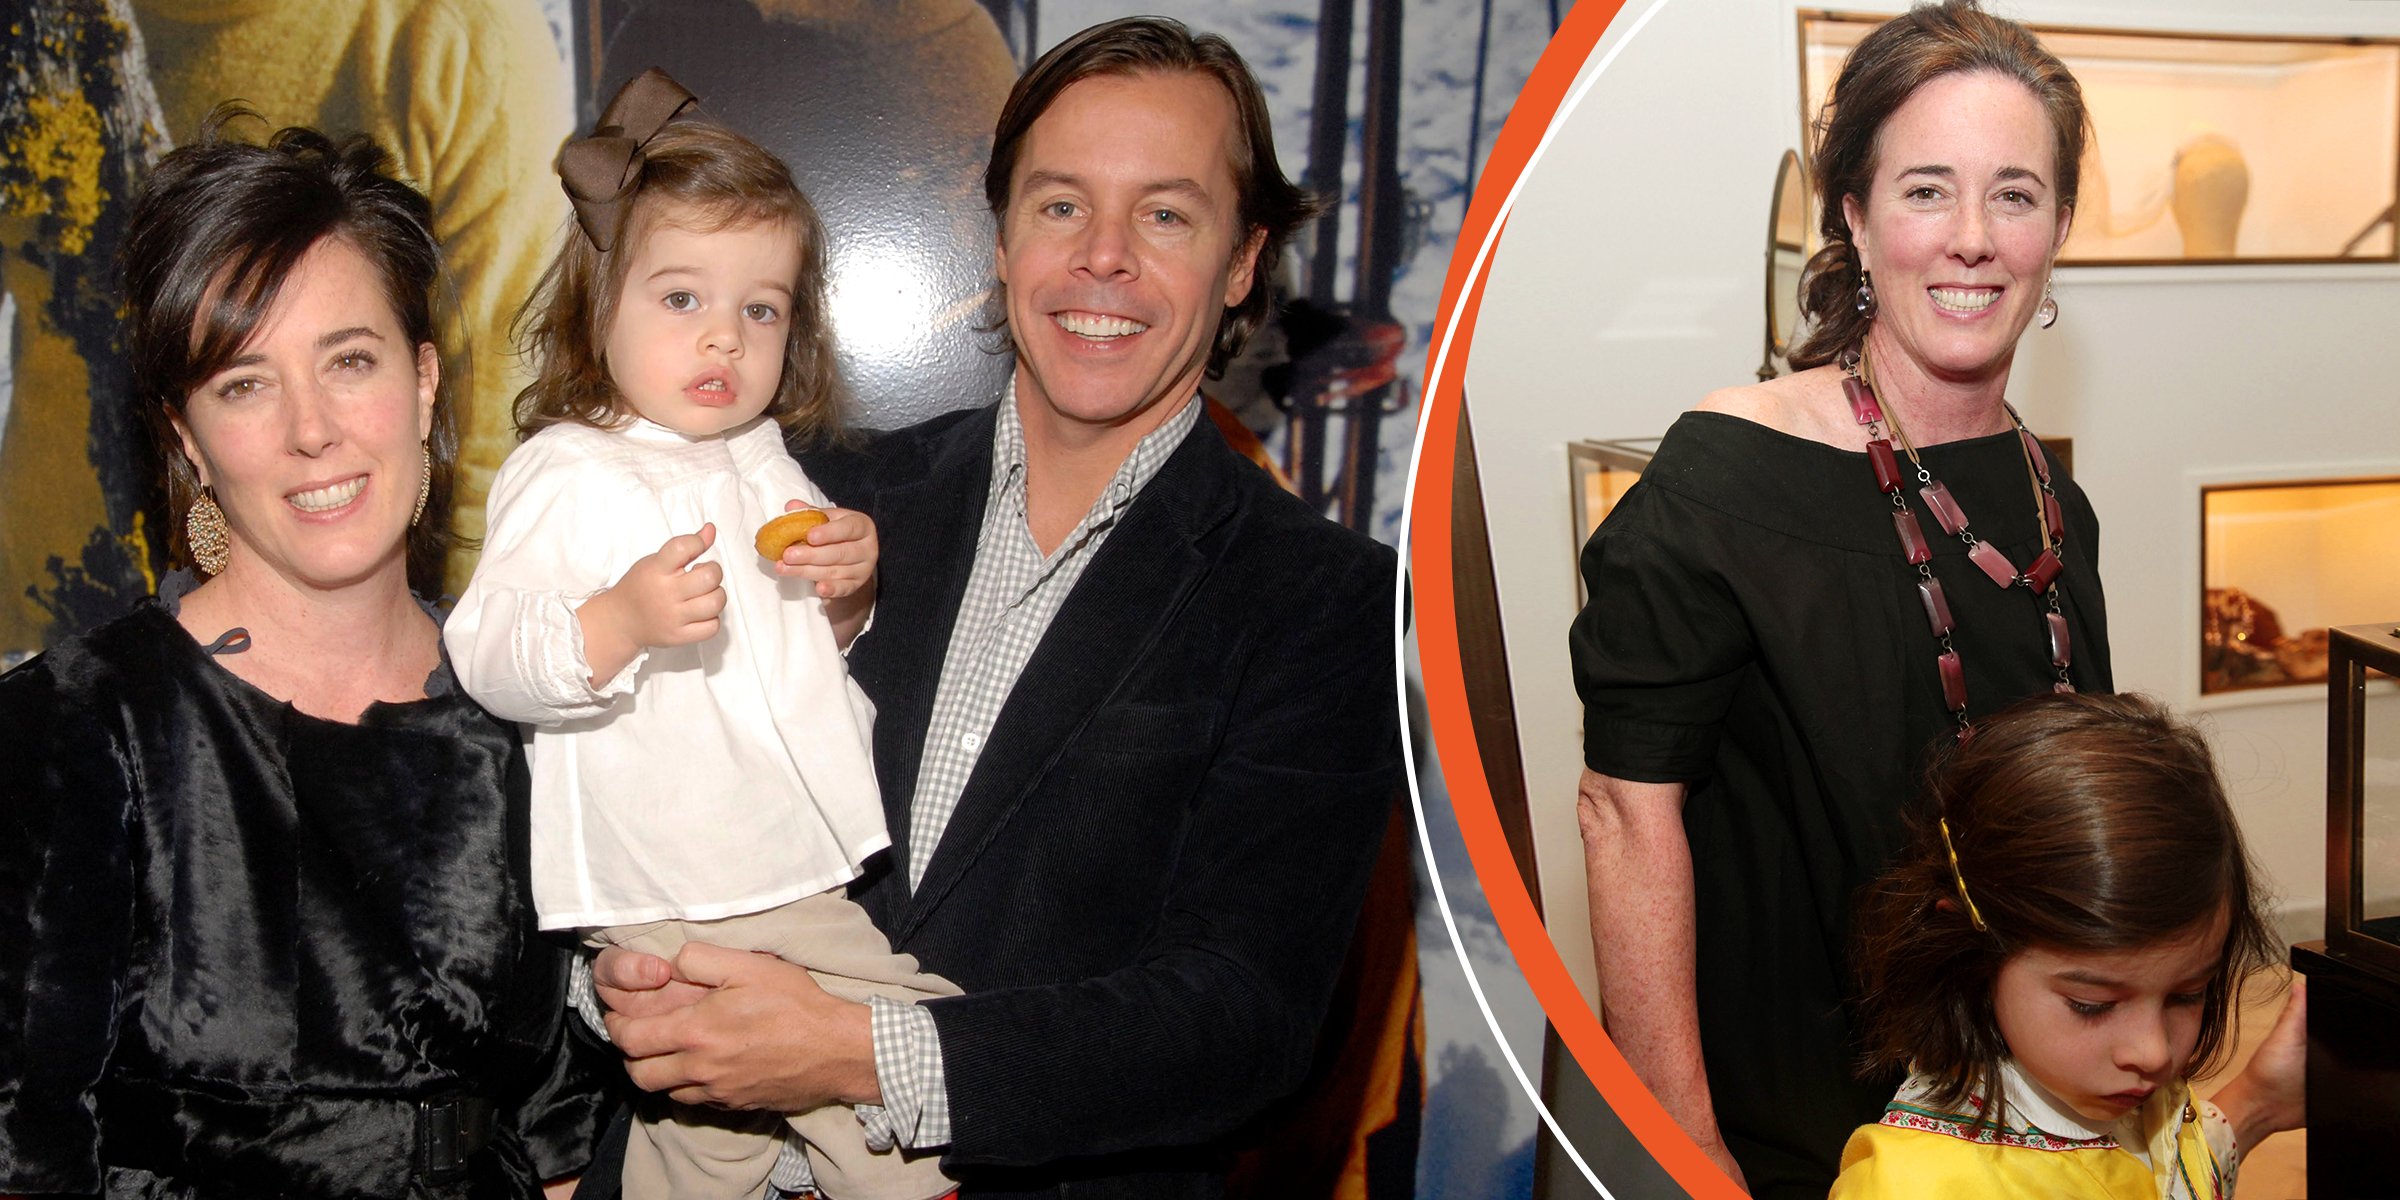 Kate Spade, Frances Spade, and Andy Spade, 2007. | Kate Spade and Frances Spade, 2010. | Source: Getty Images